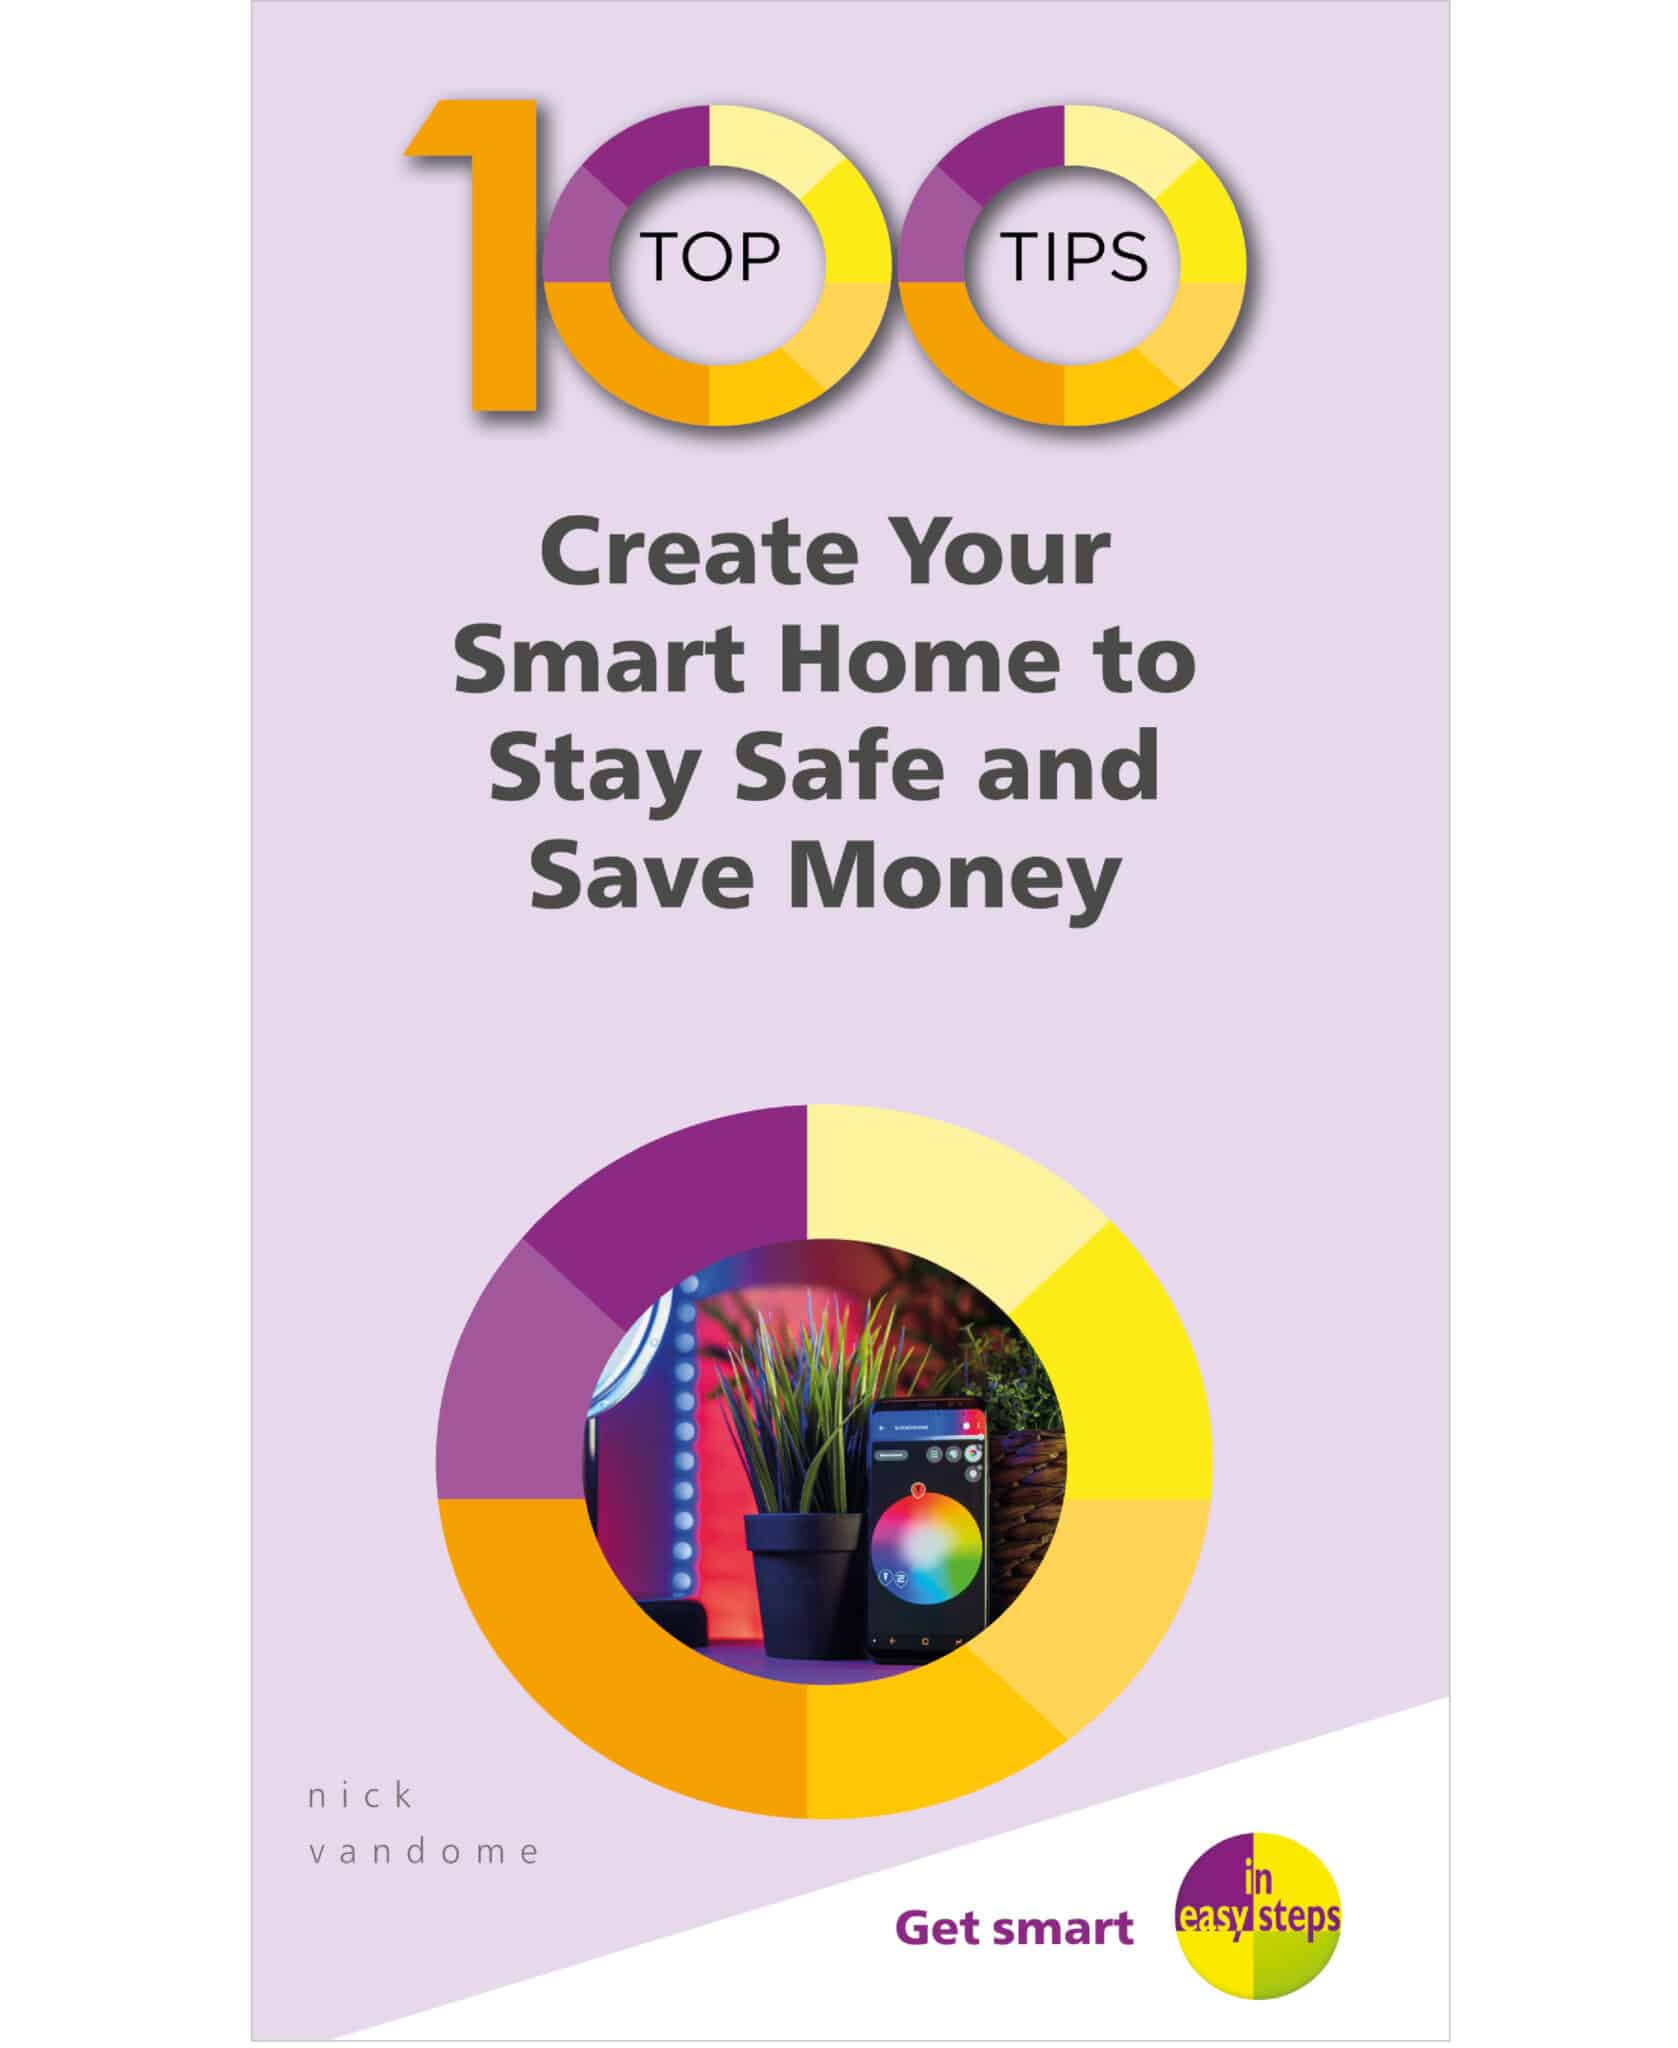 100 Top Tips - Create Your Smart Home to Stay Safe and Save Money_cover